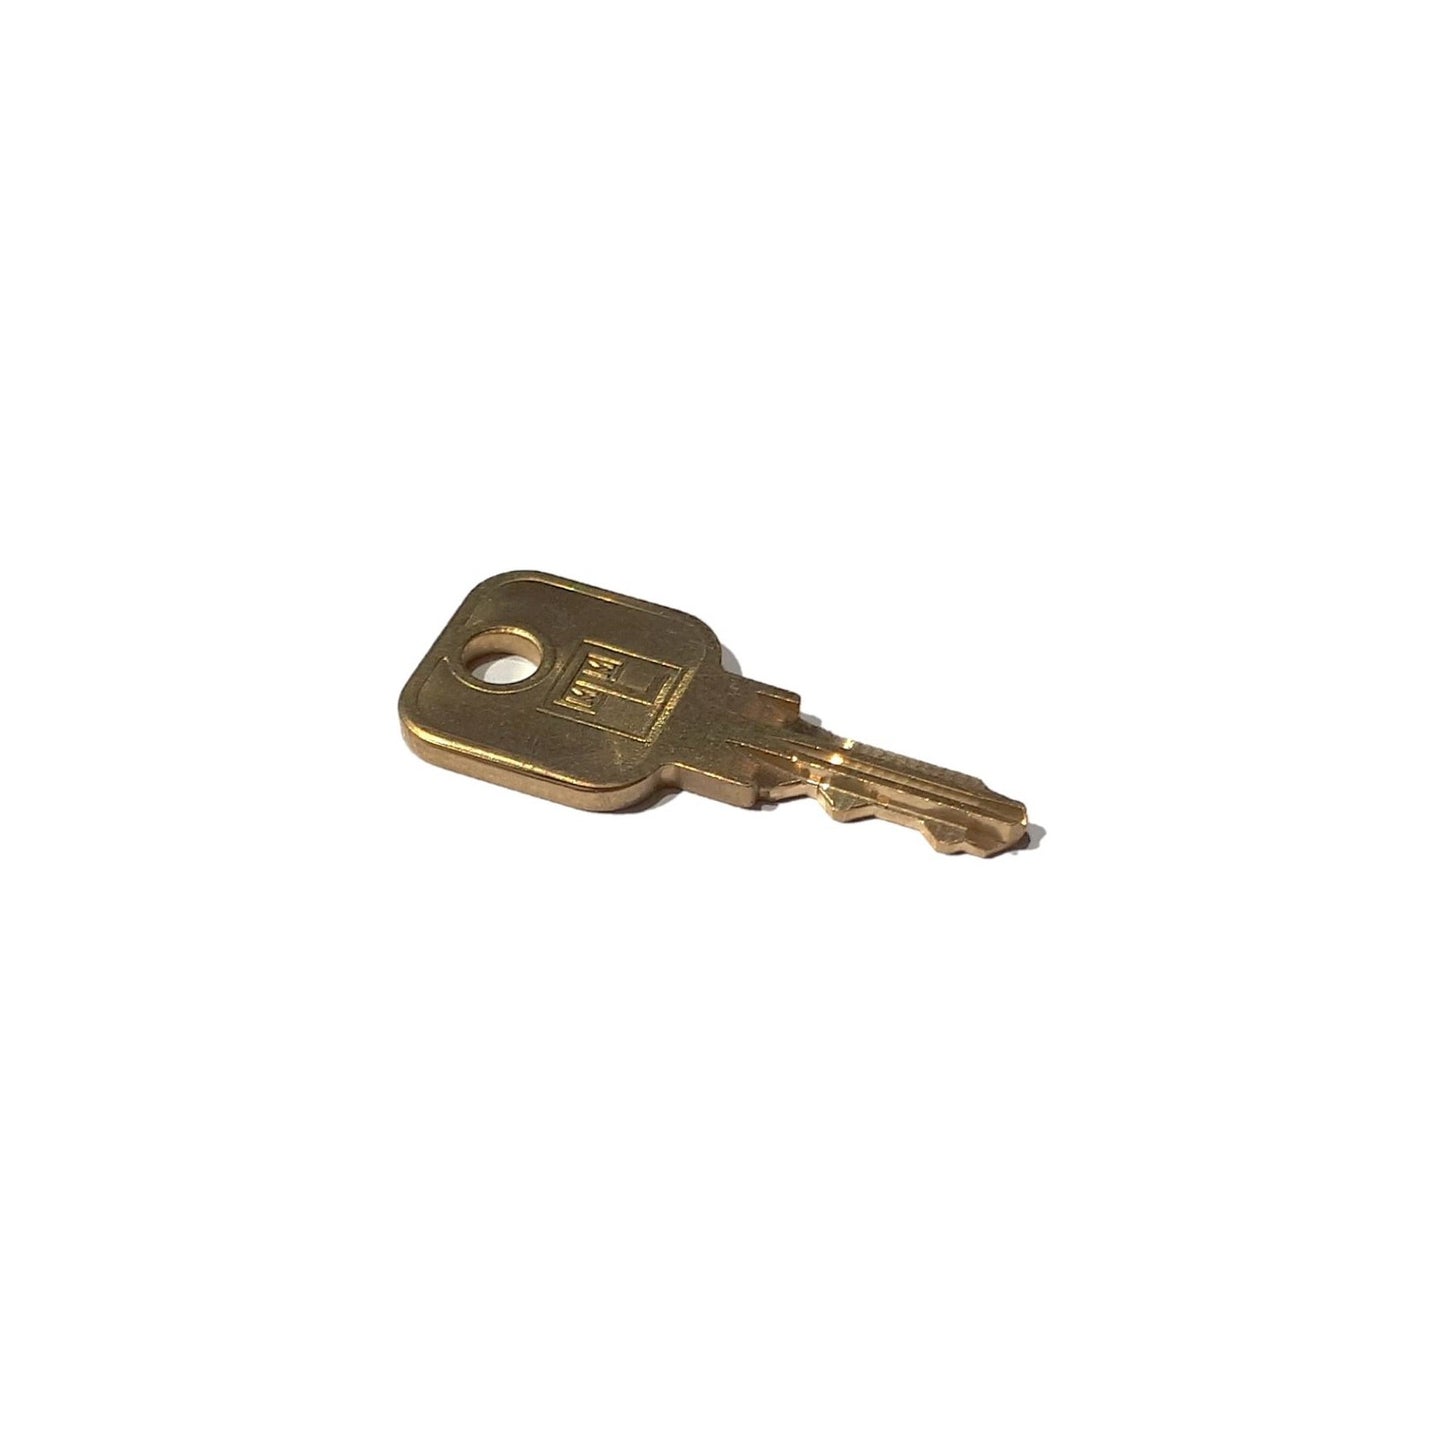 Master key HSA12 for 7000/18000 series